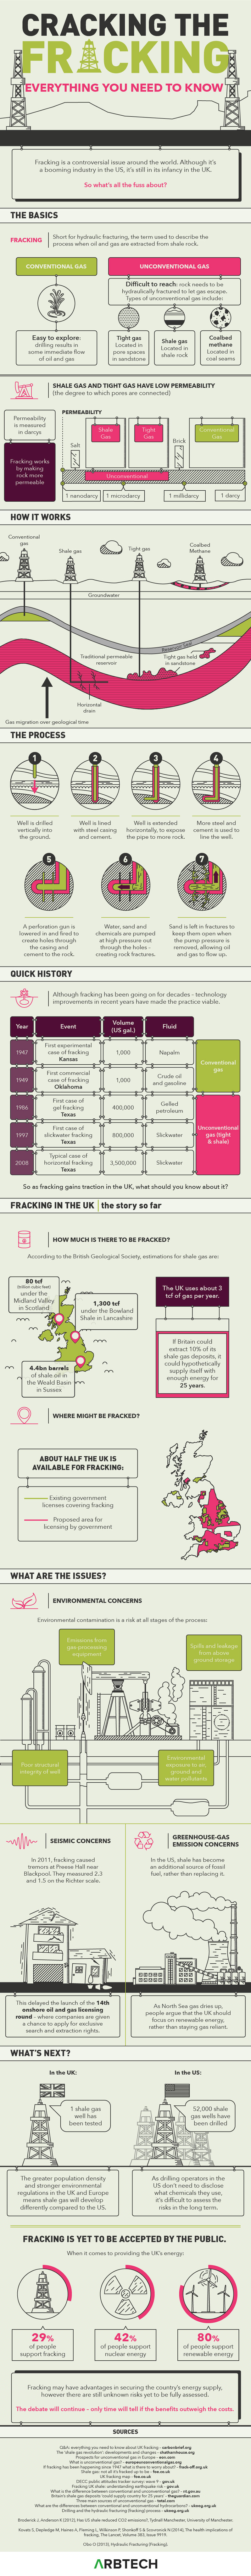 Cracking the Fracking: Everything You Need to Know